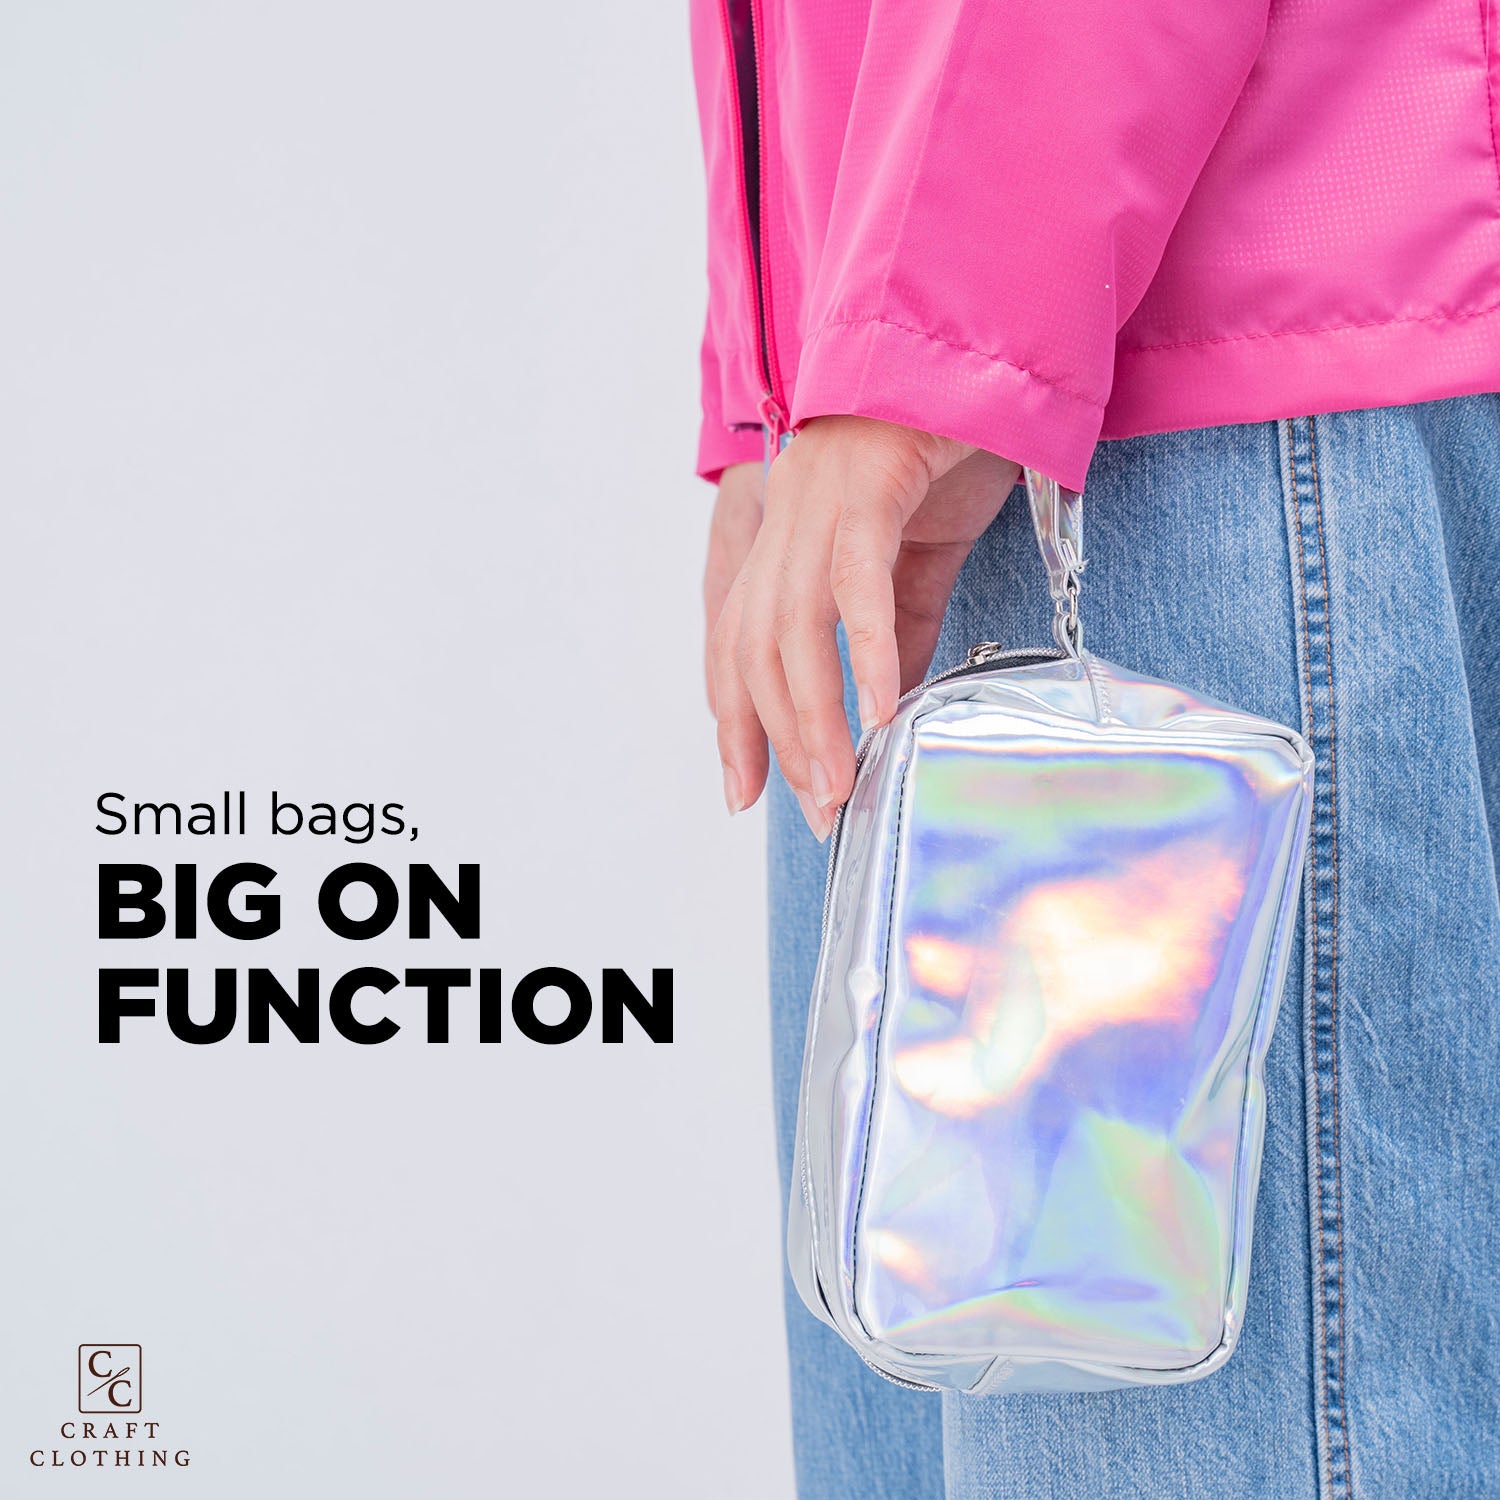 Small bags, Big on Function